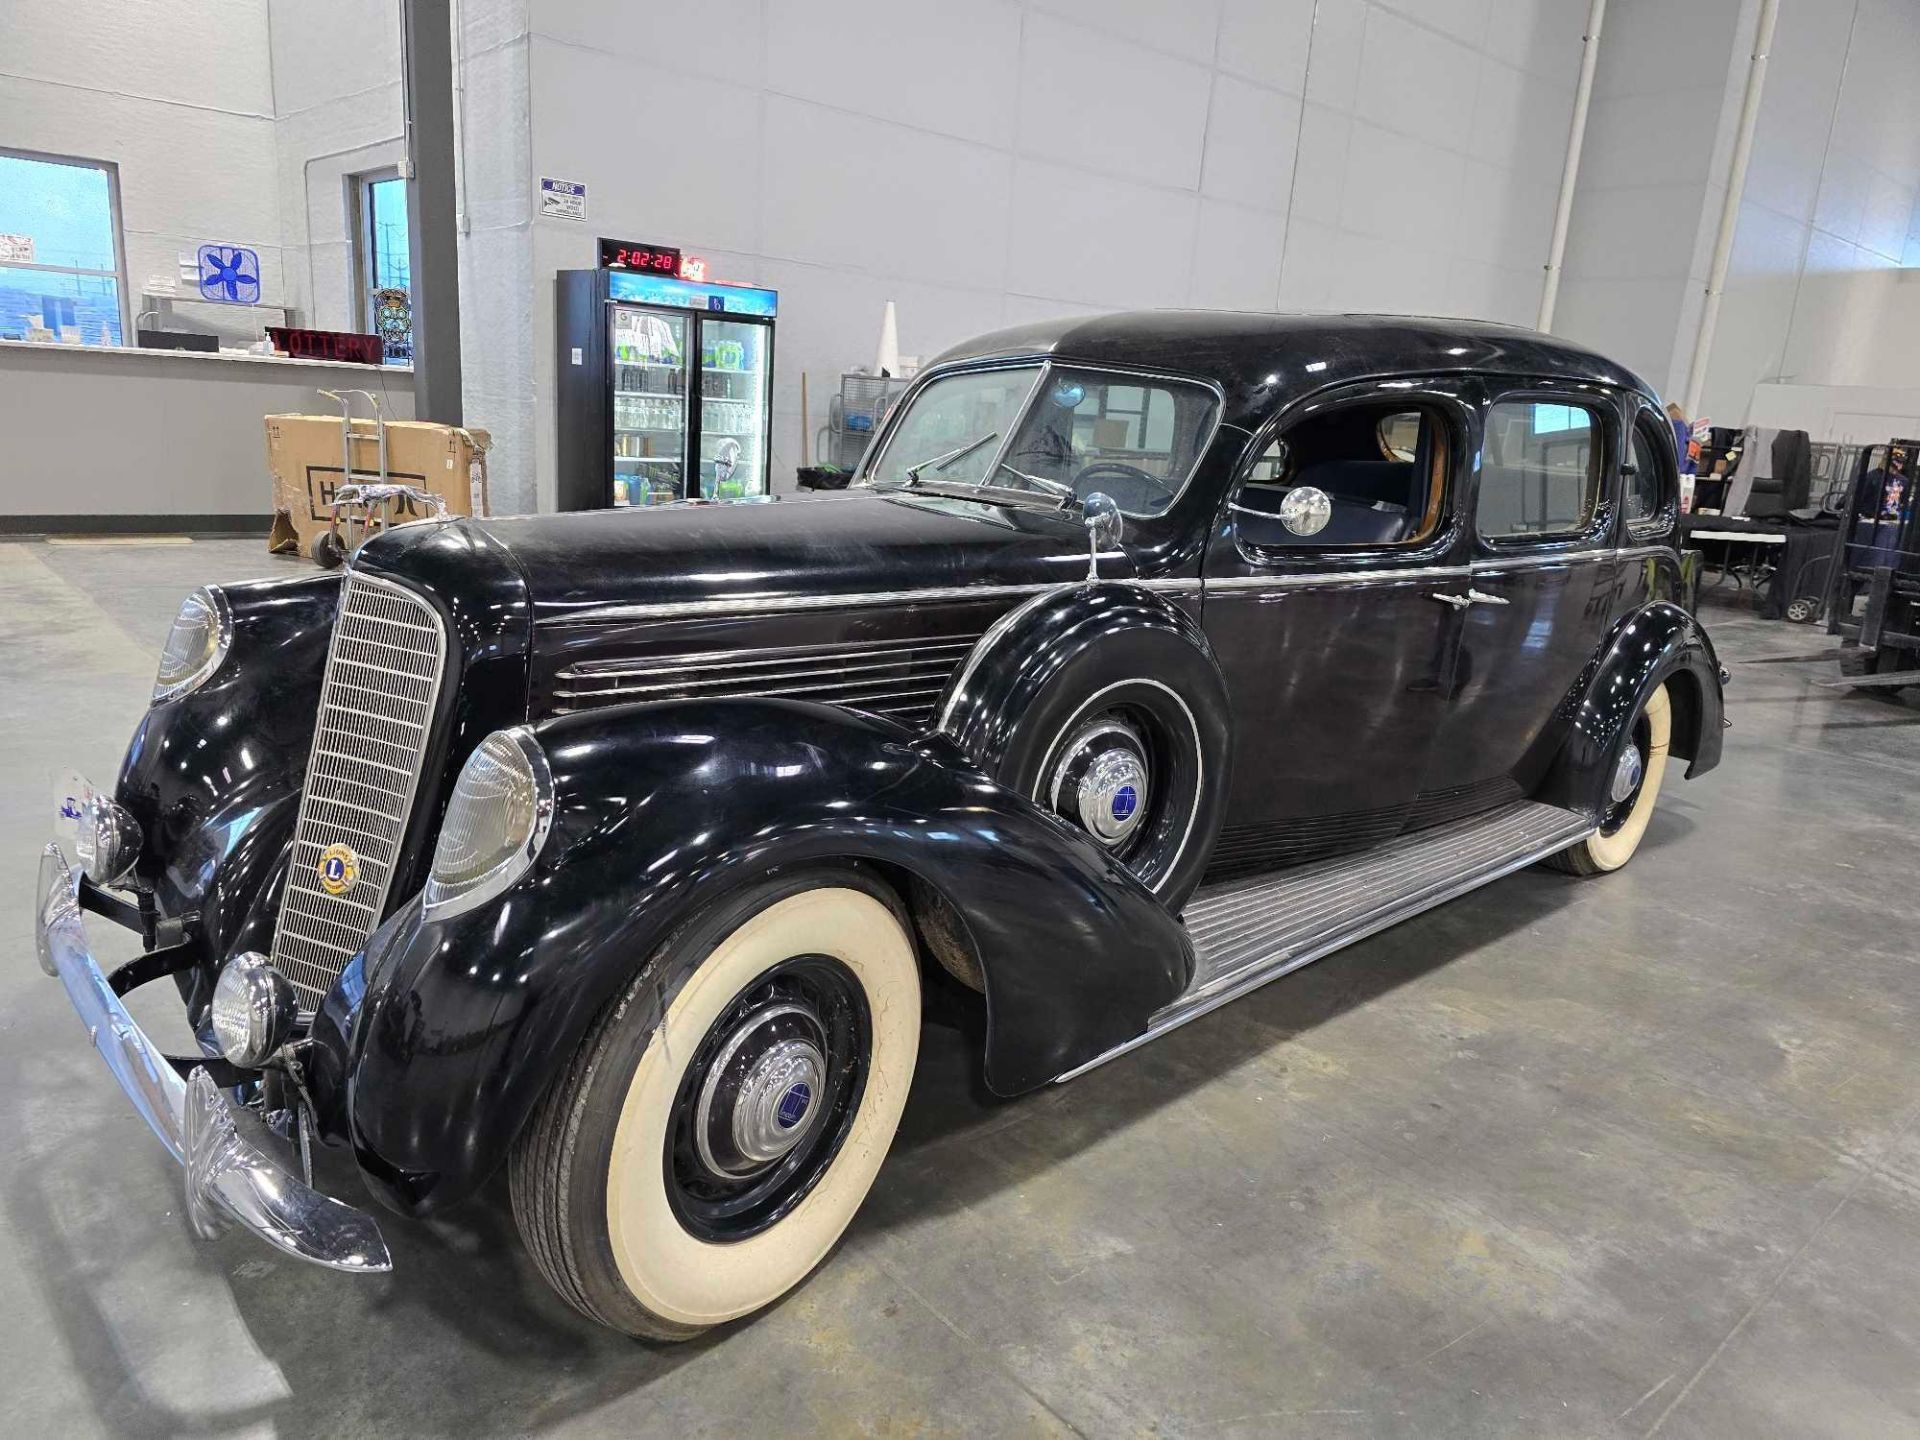 1938 Lincoln Model K v12 (last ran 4 years ago, we believe it needs new gas and a battery)  VIN #K91 - Image 25 of 37